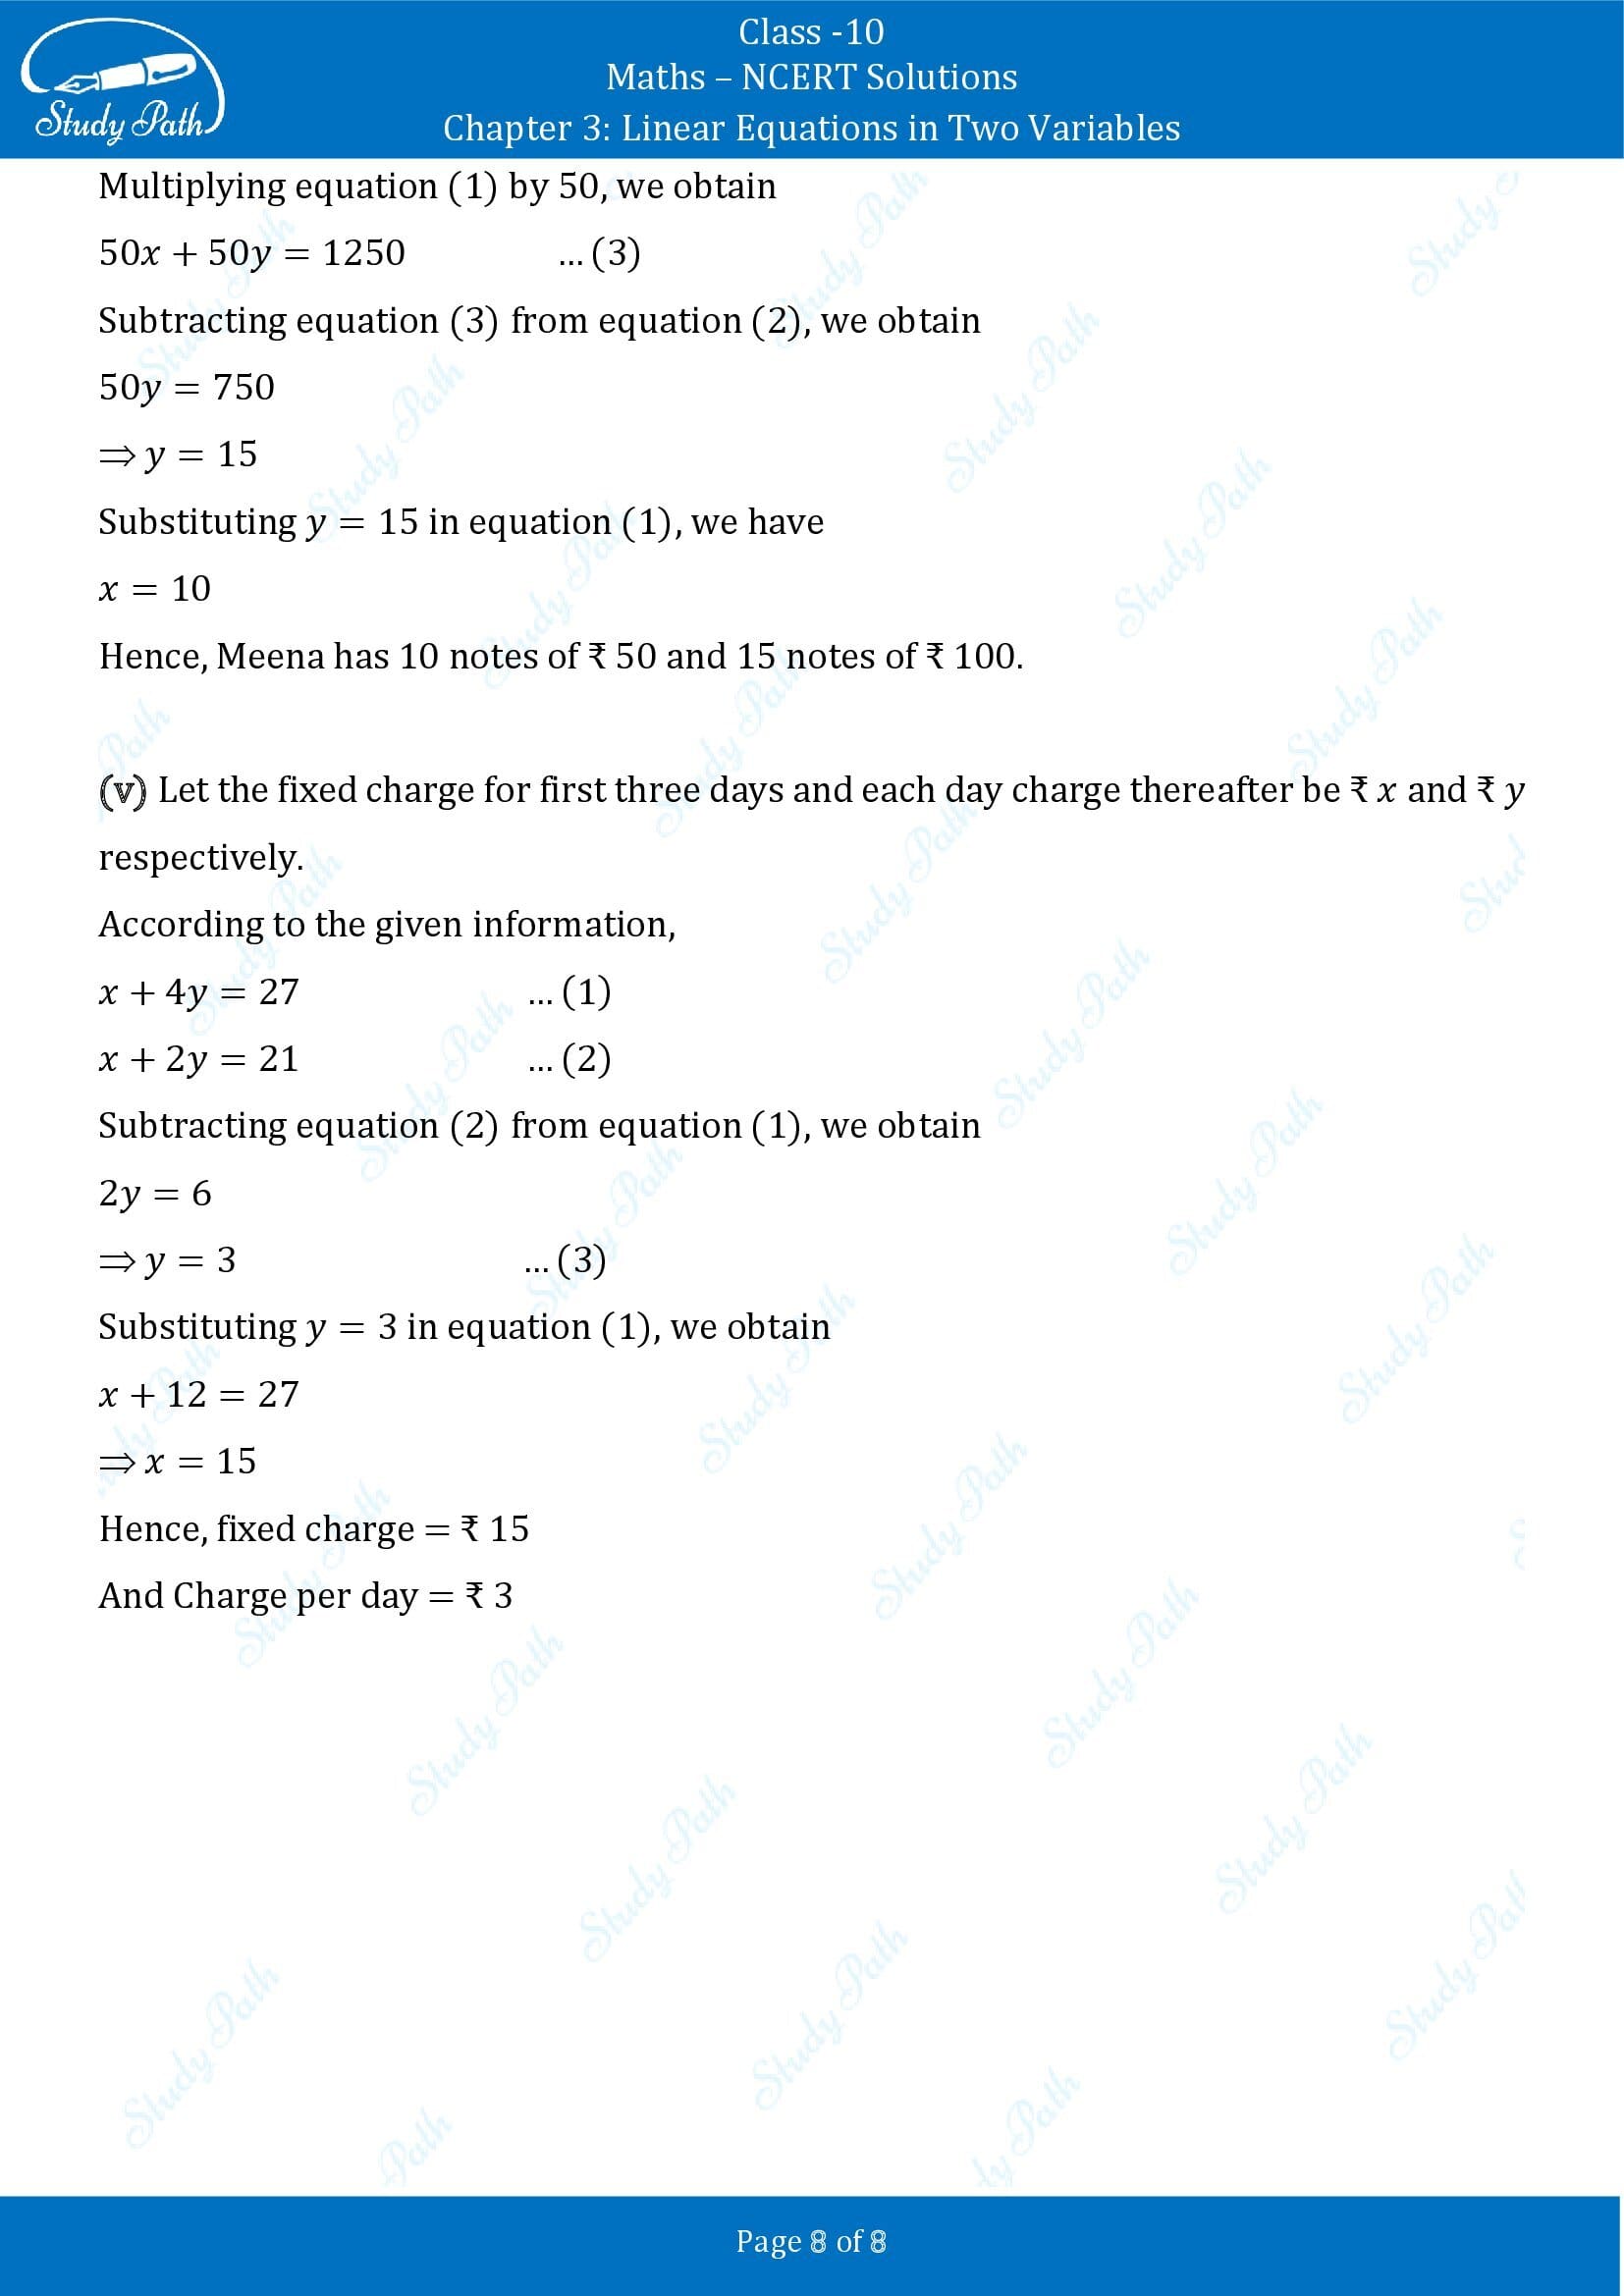 NCERT Solutions for Class 10 Maths Chapter 3 Linear Equations in Two Variables Exercise 3.4 00008